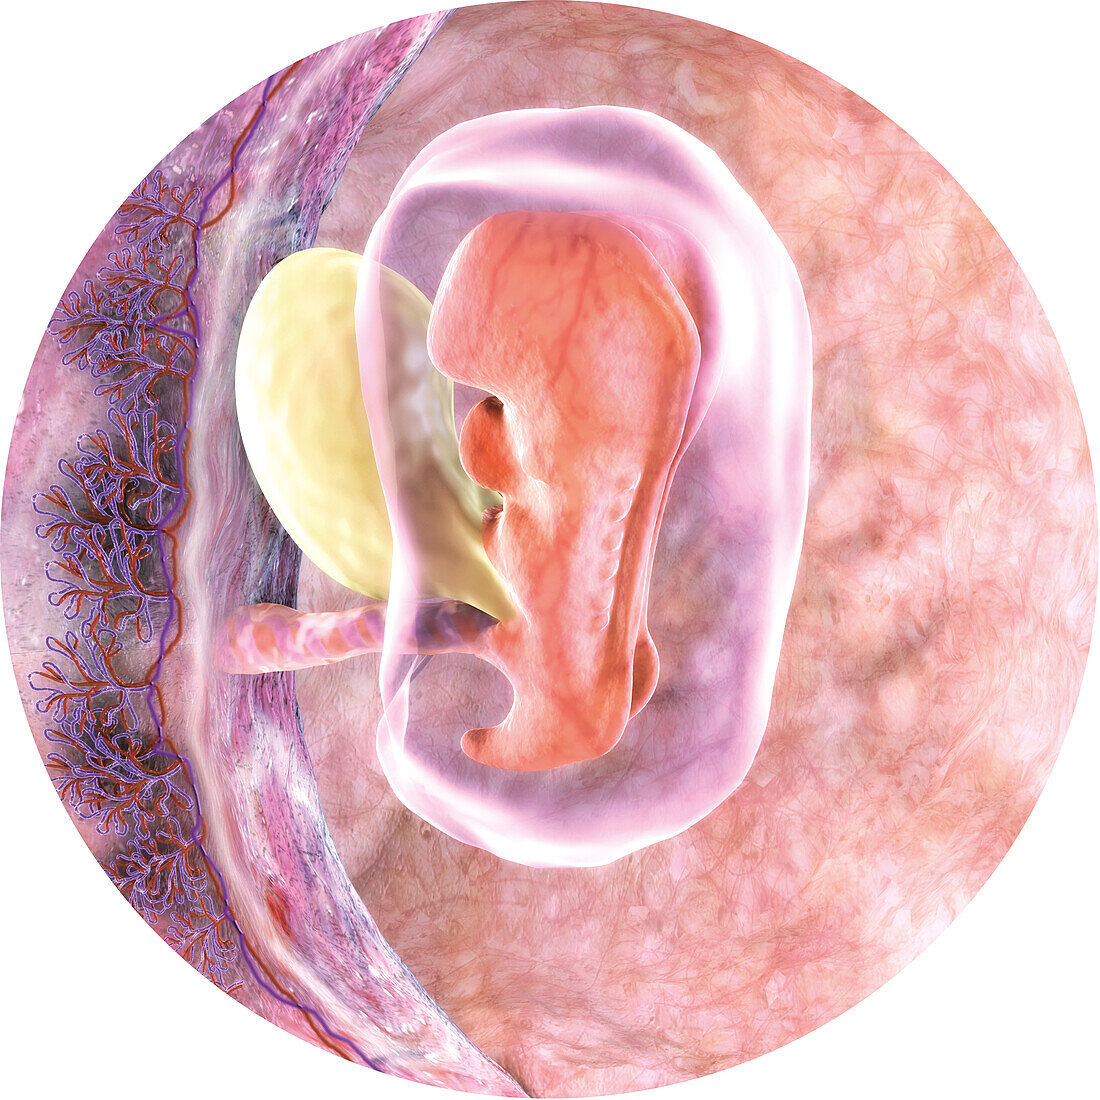 Developing embryo in the womb at 5 weeks, illustration